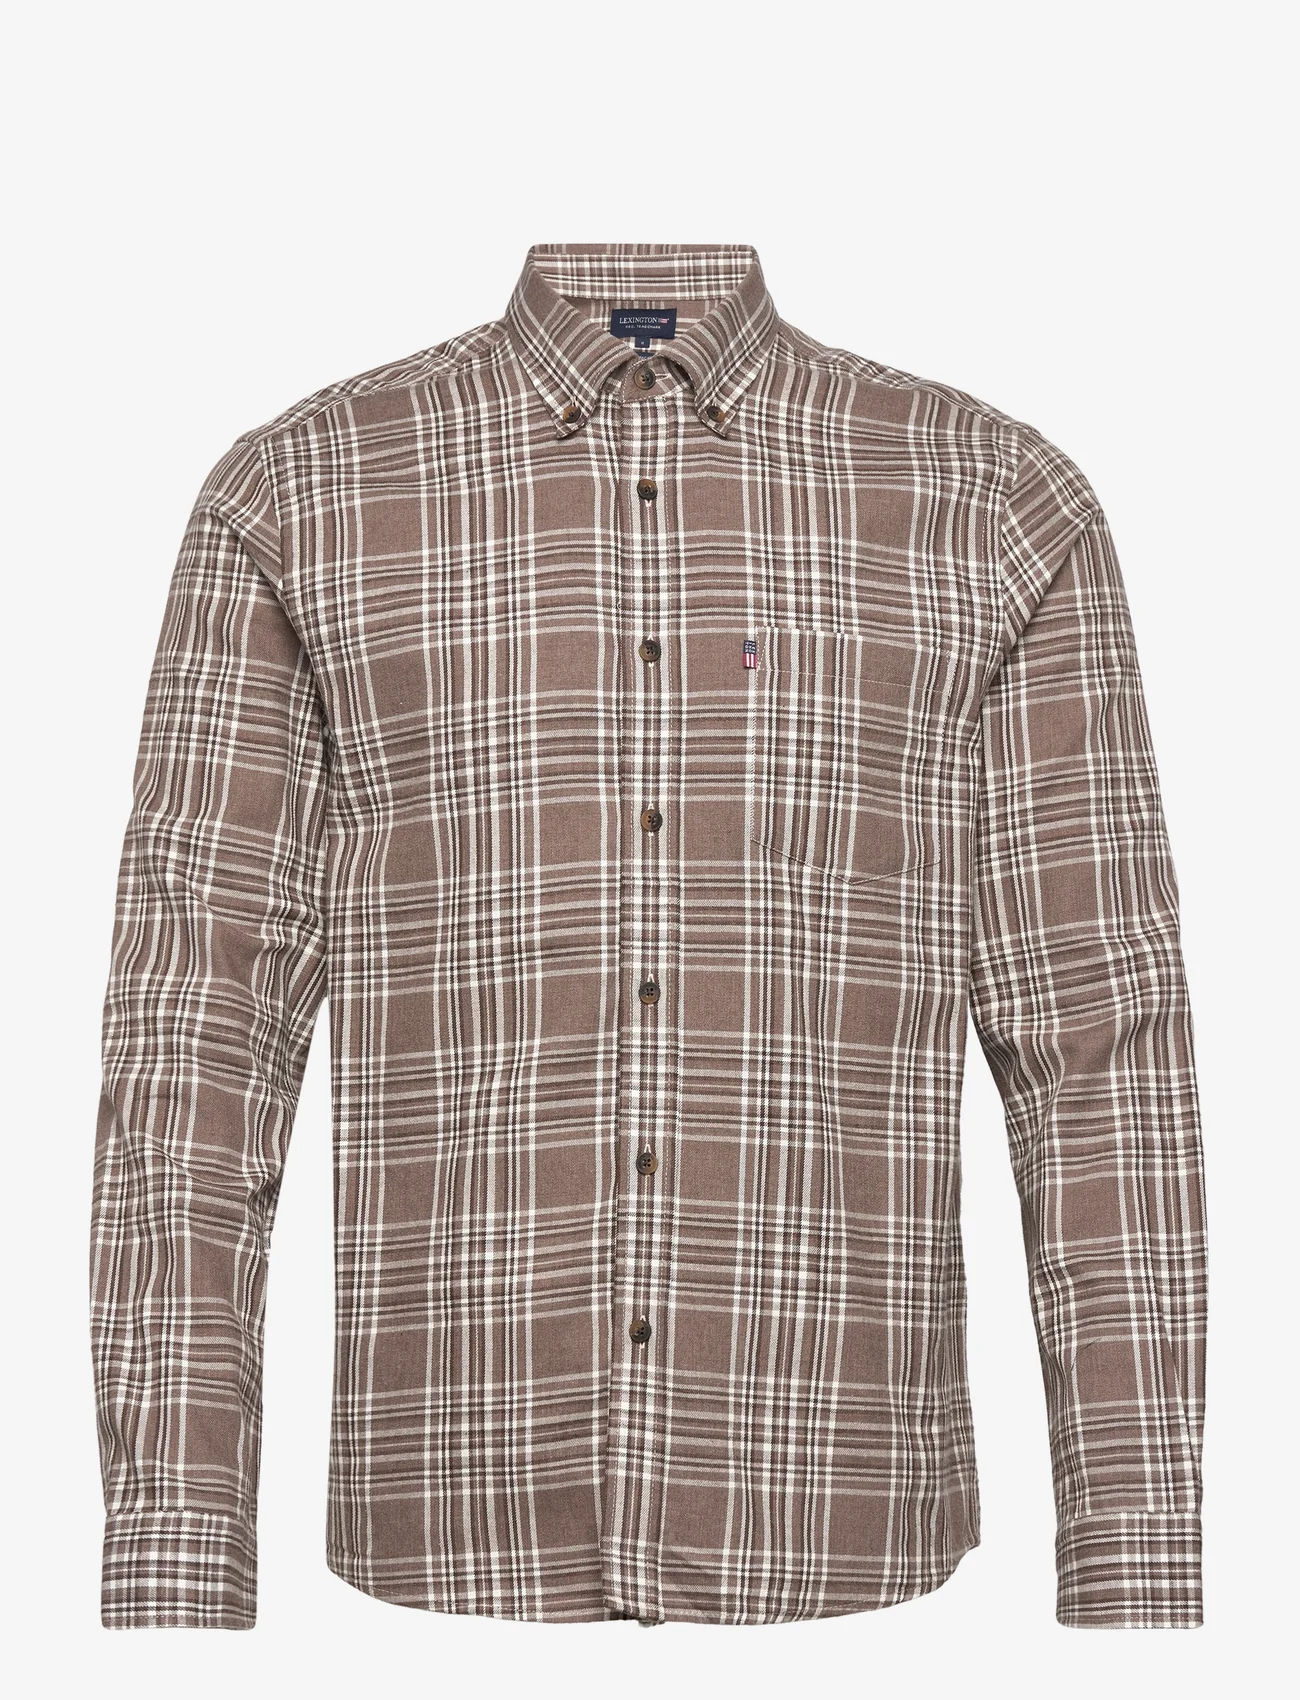 Lexington Clothing - Peter Lt Flannel Checked Shirt - brown multi check - 0